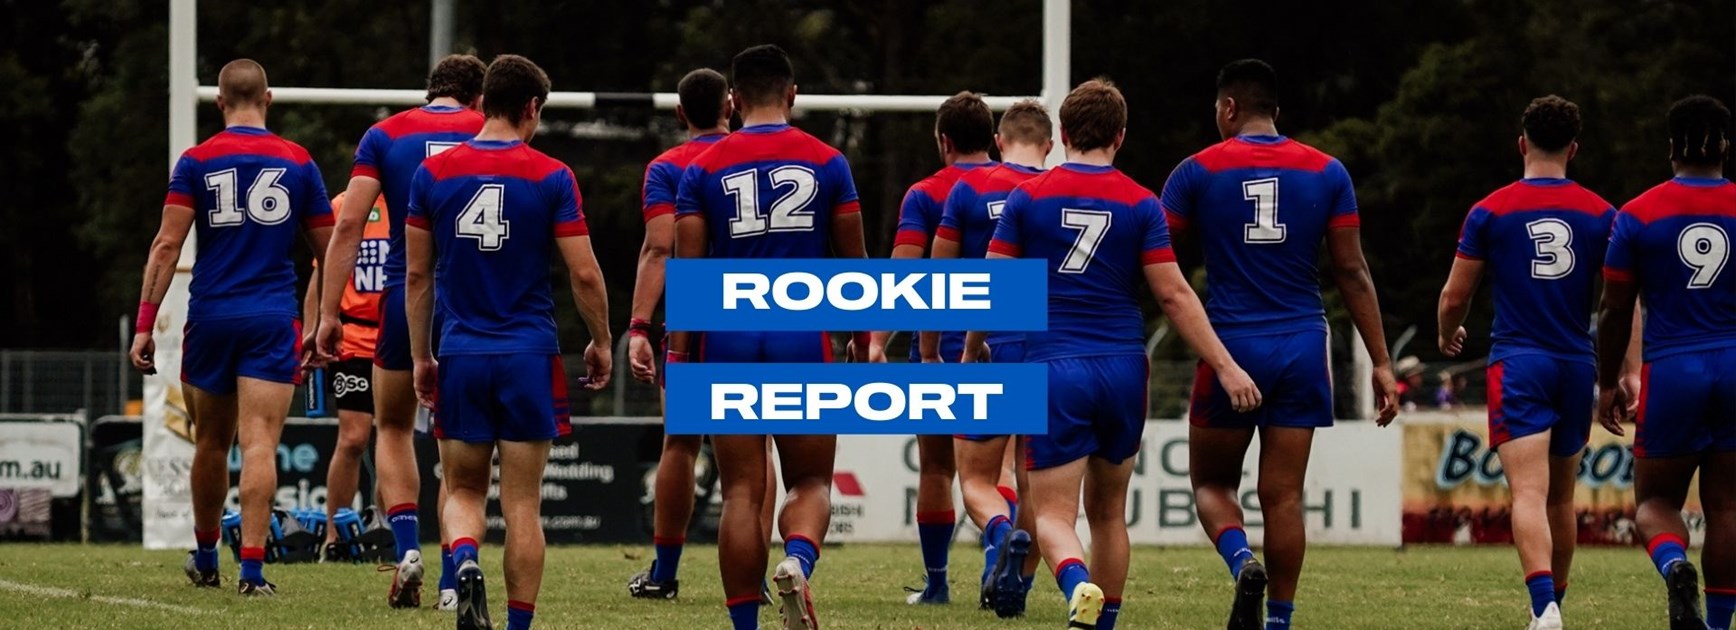 Rookie Report: SG Ball and Harold Matts sides  defeated in tough conditions